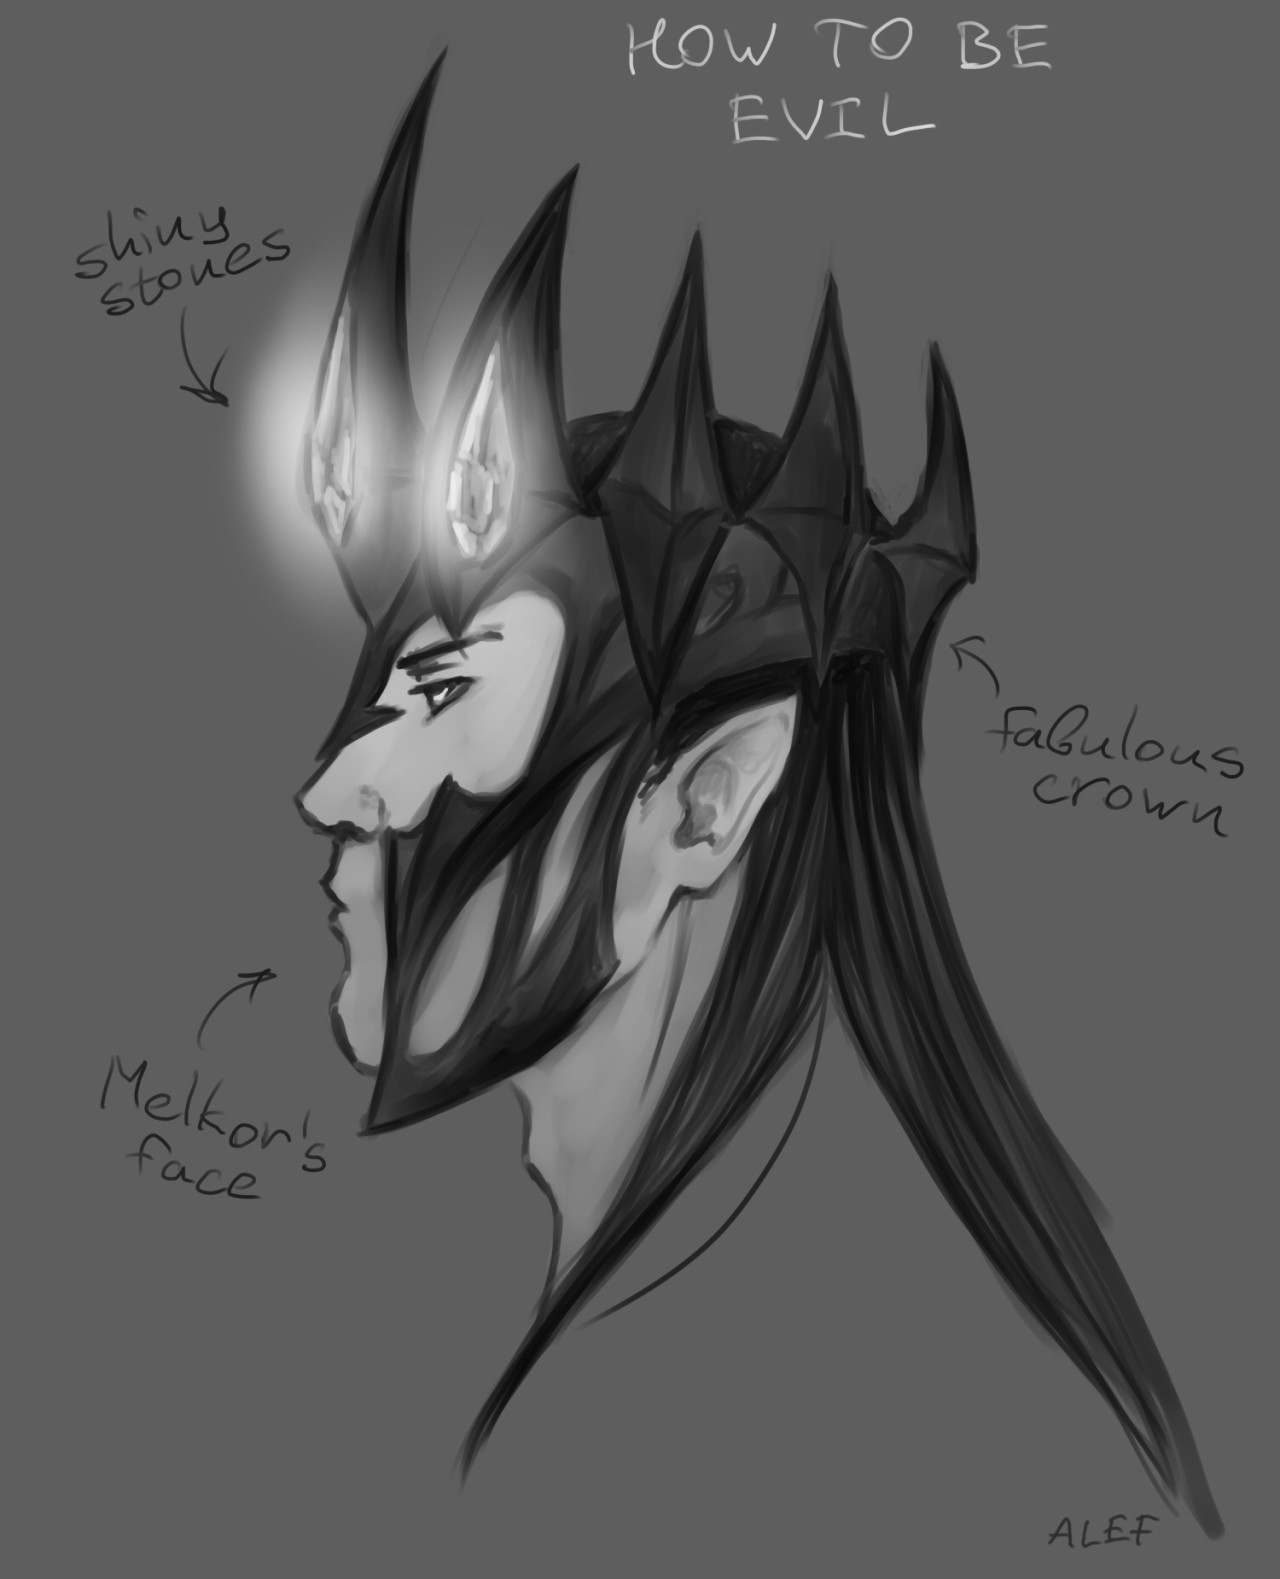 Another concept sketch for future Melkor cosplay. No, gosh, no, I’m not going to be Melkor %) I am Sauron and I make costume for my precious Evil :3
So, the crown concept already accepted by this sassy.